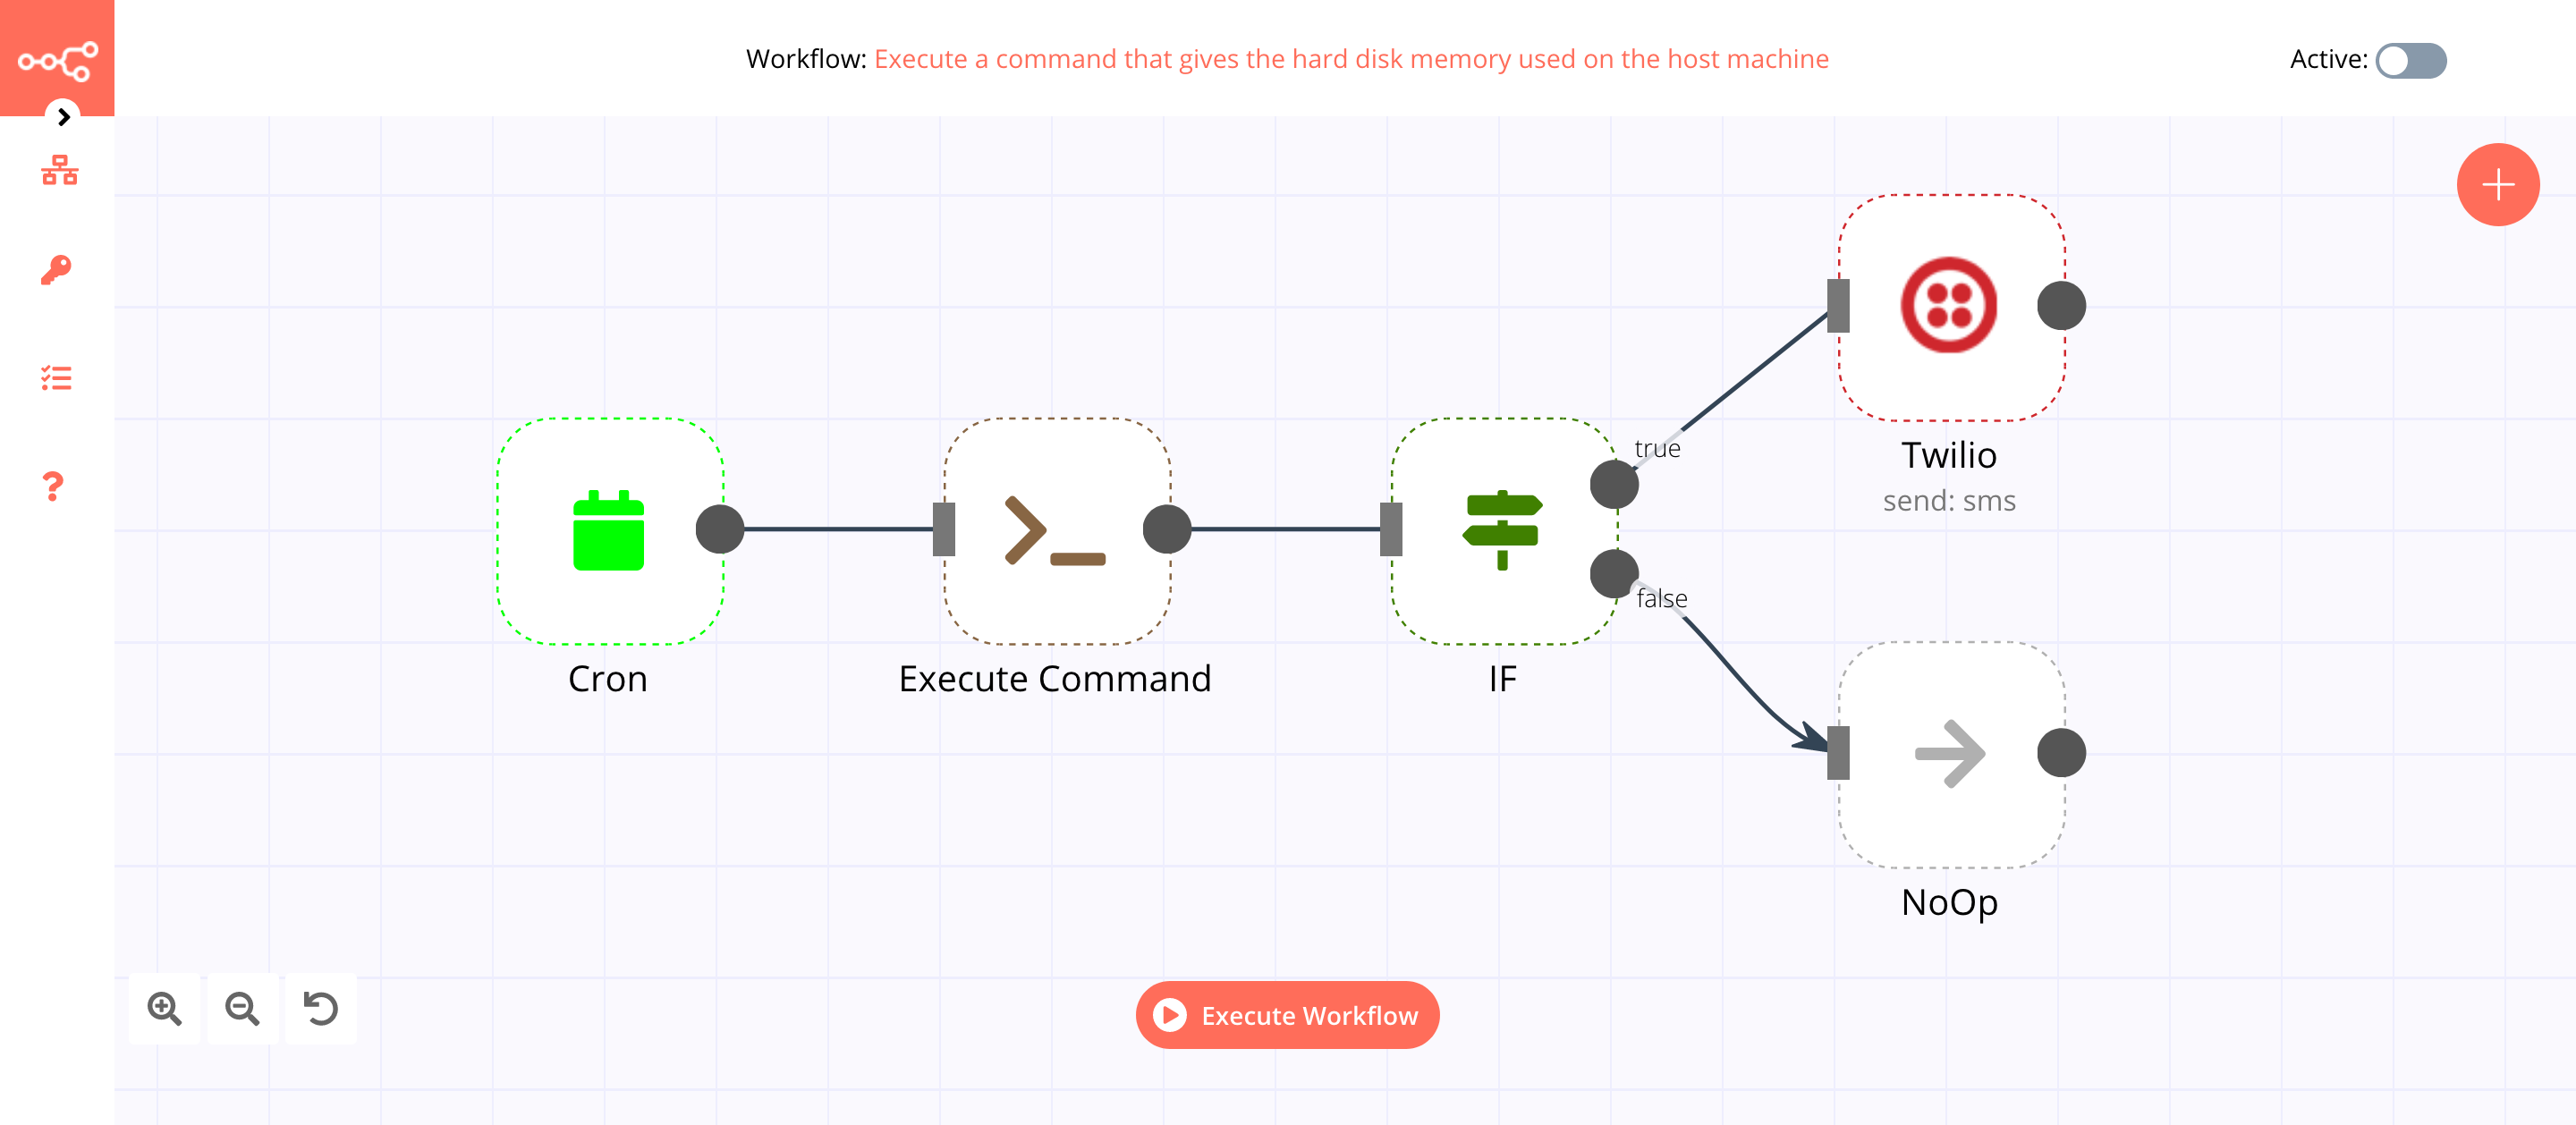 A workflow with the Execute Command node